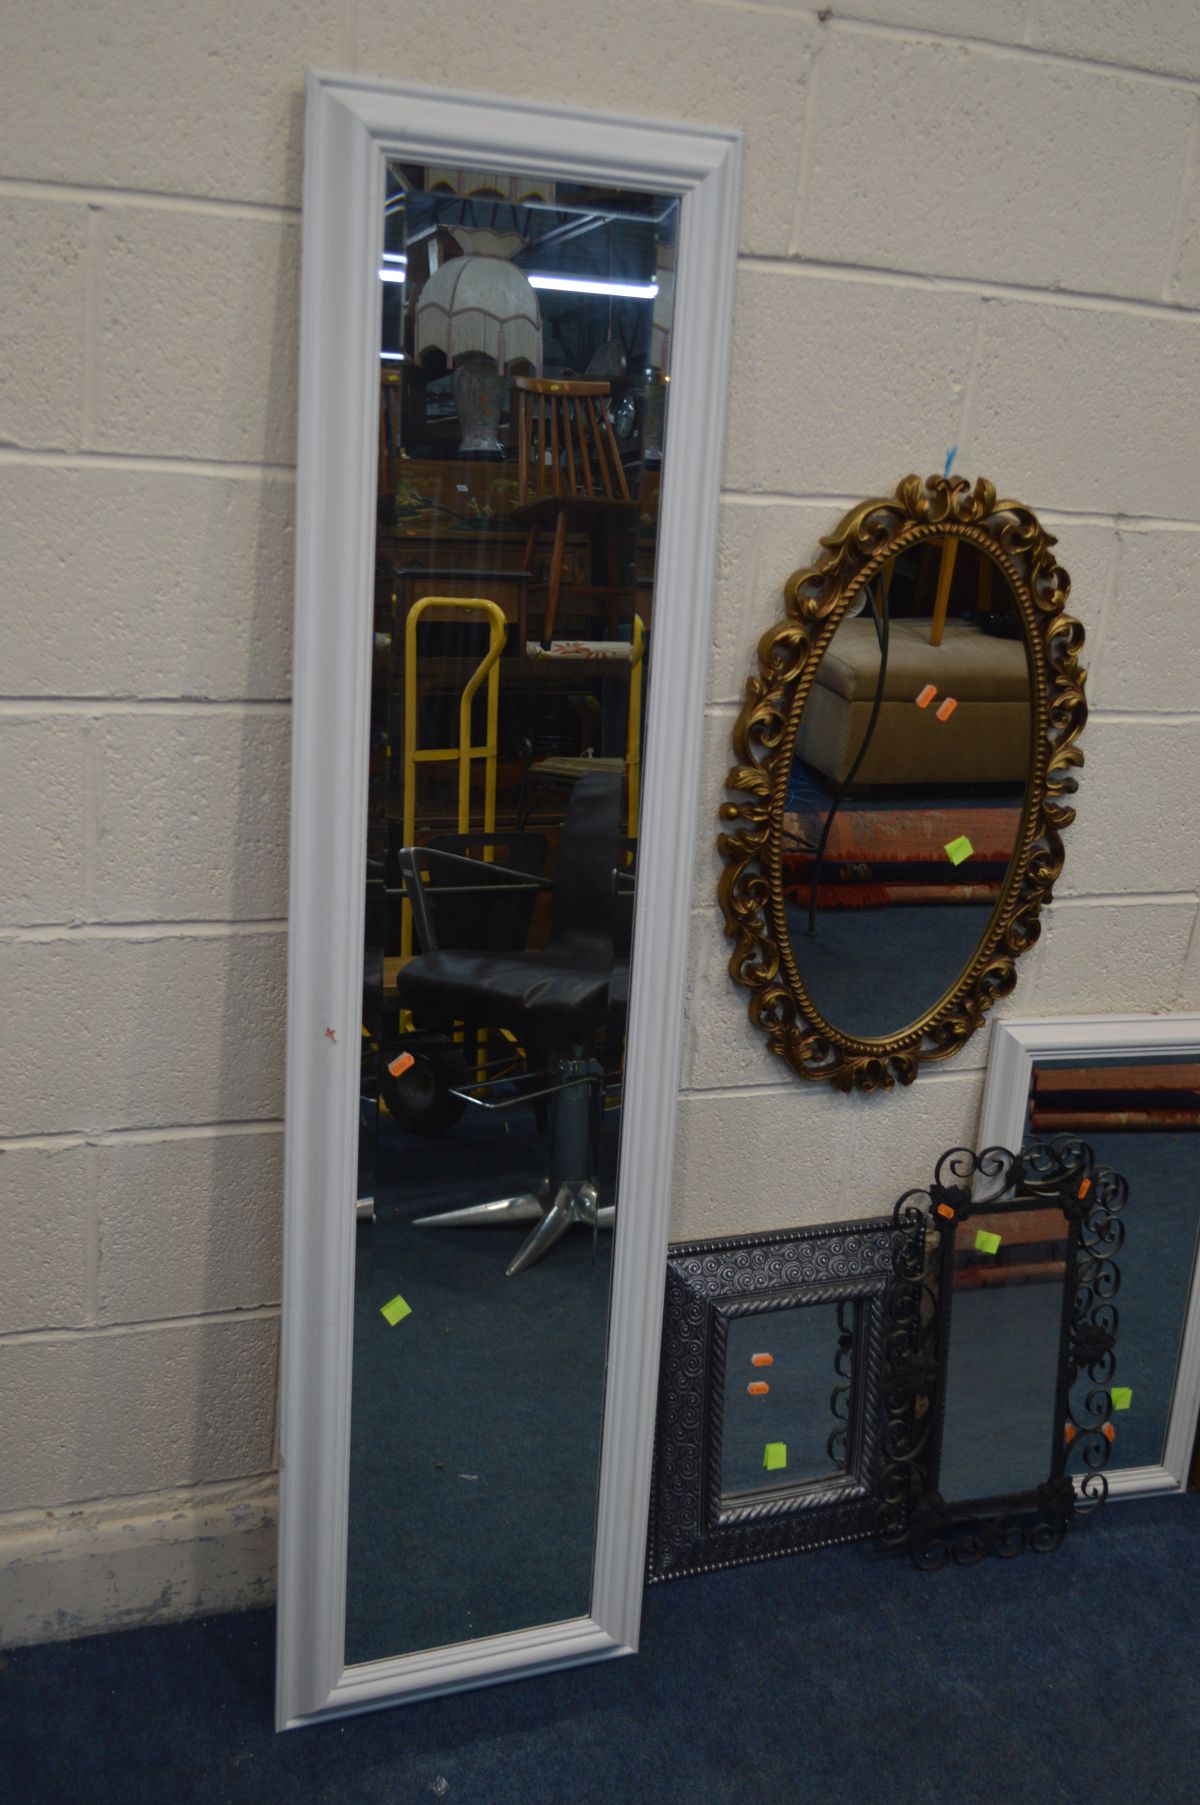 TEN VARIOUS WALL MIRRORS OF VARIOUS STYLES, SIZES MATERIALS - Image 6 of 6